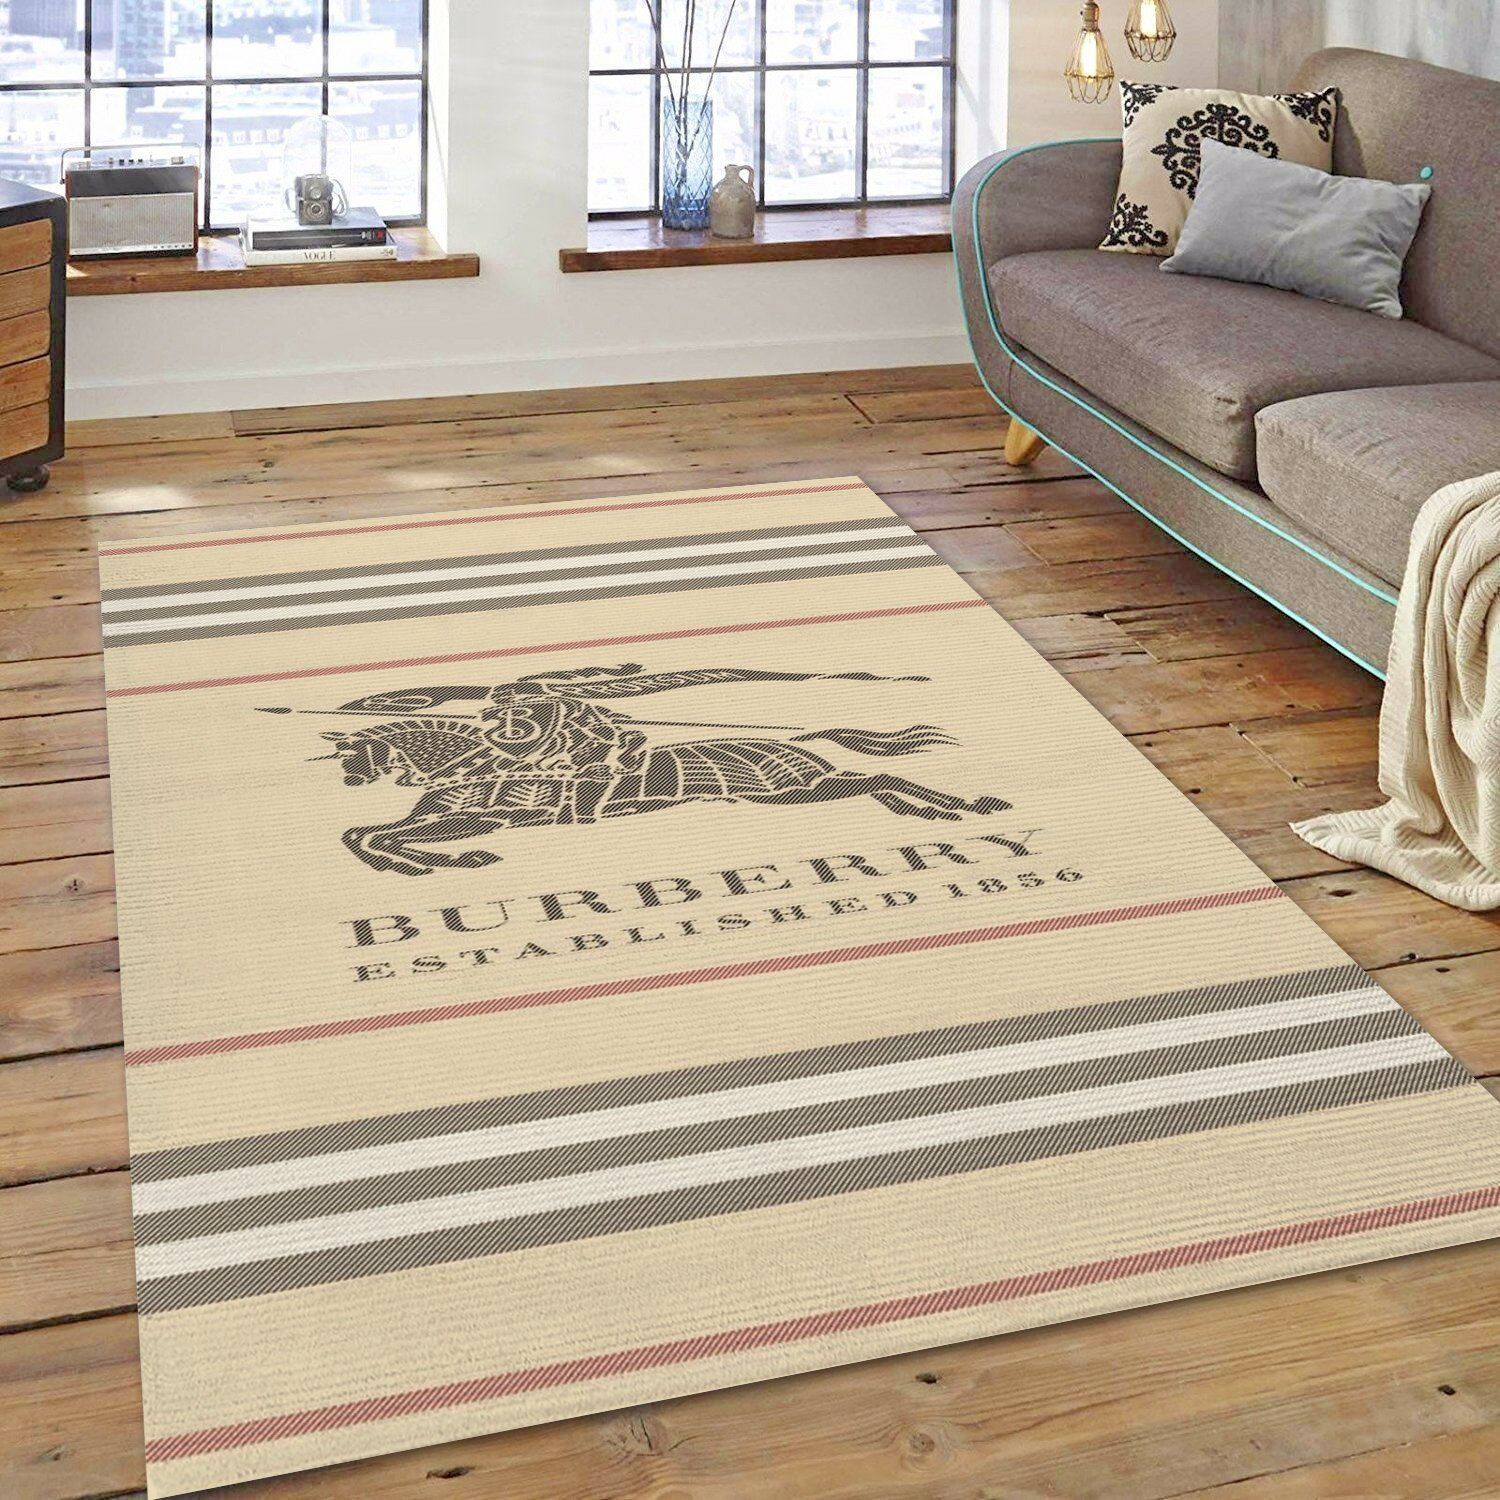 Burberry Luxury Brand 2 Area Rug Living Room And Bedroom Rug Us Gift Decor VH3